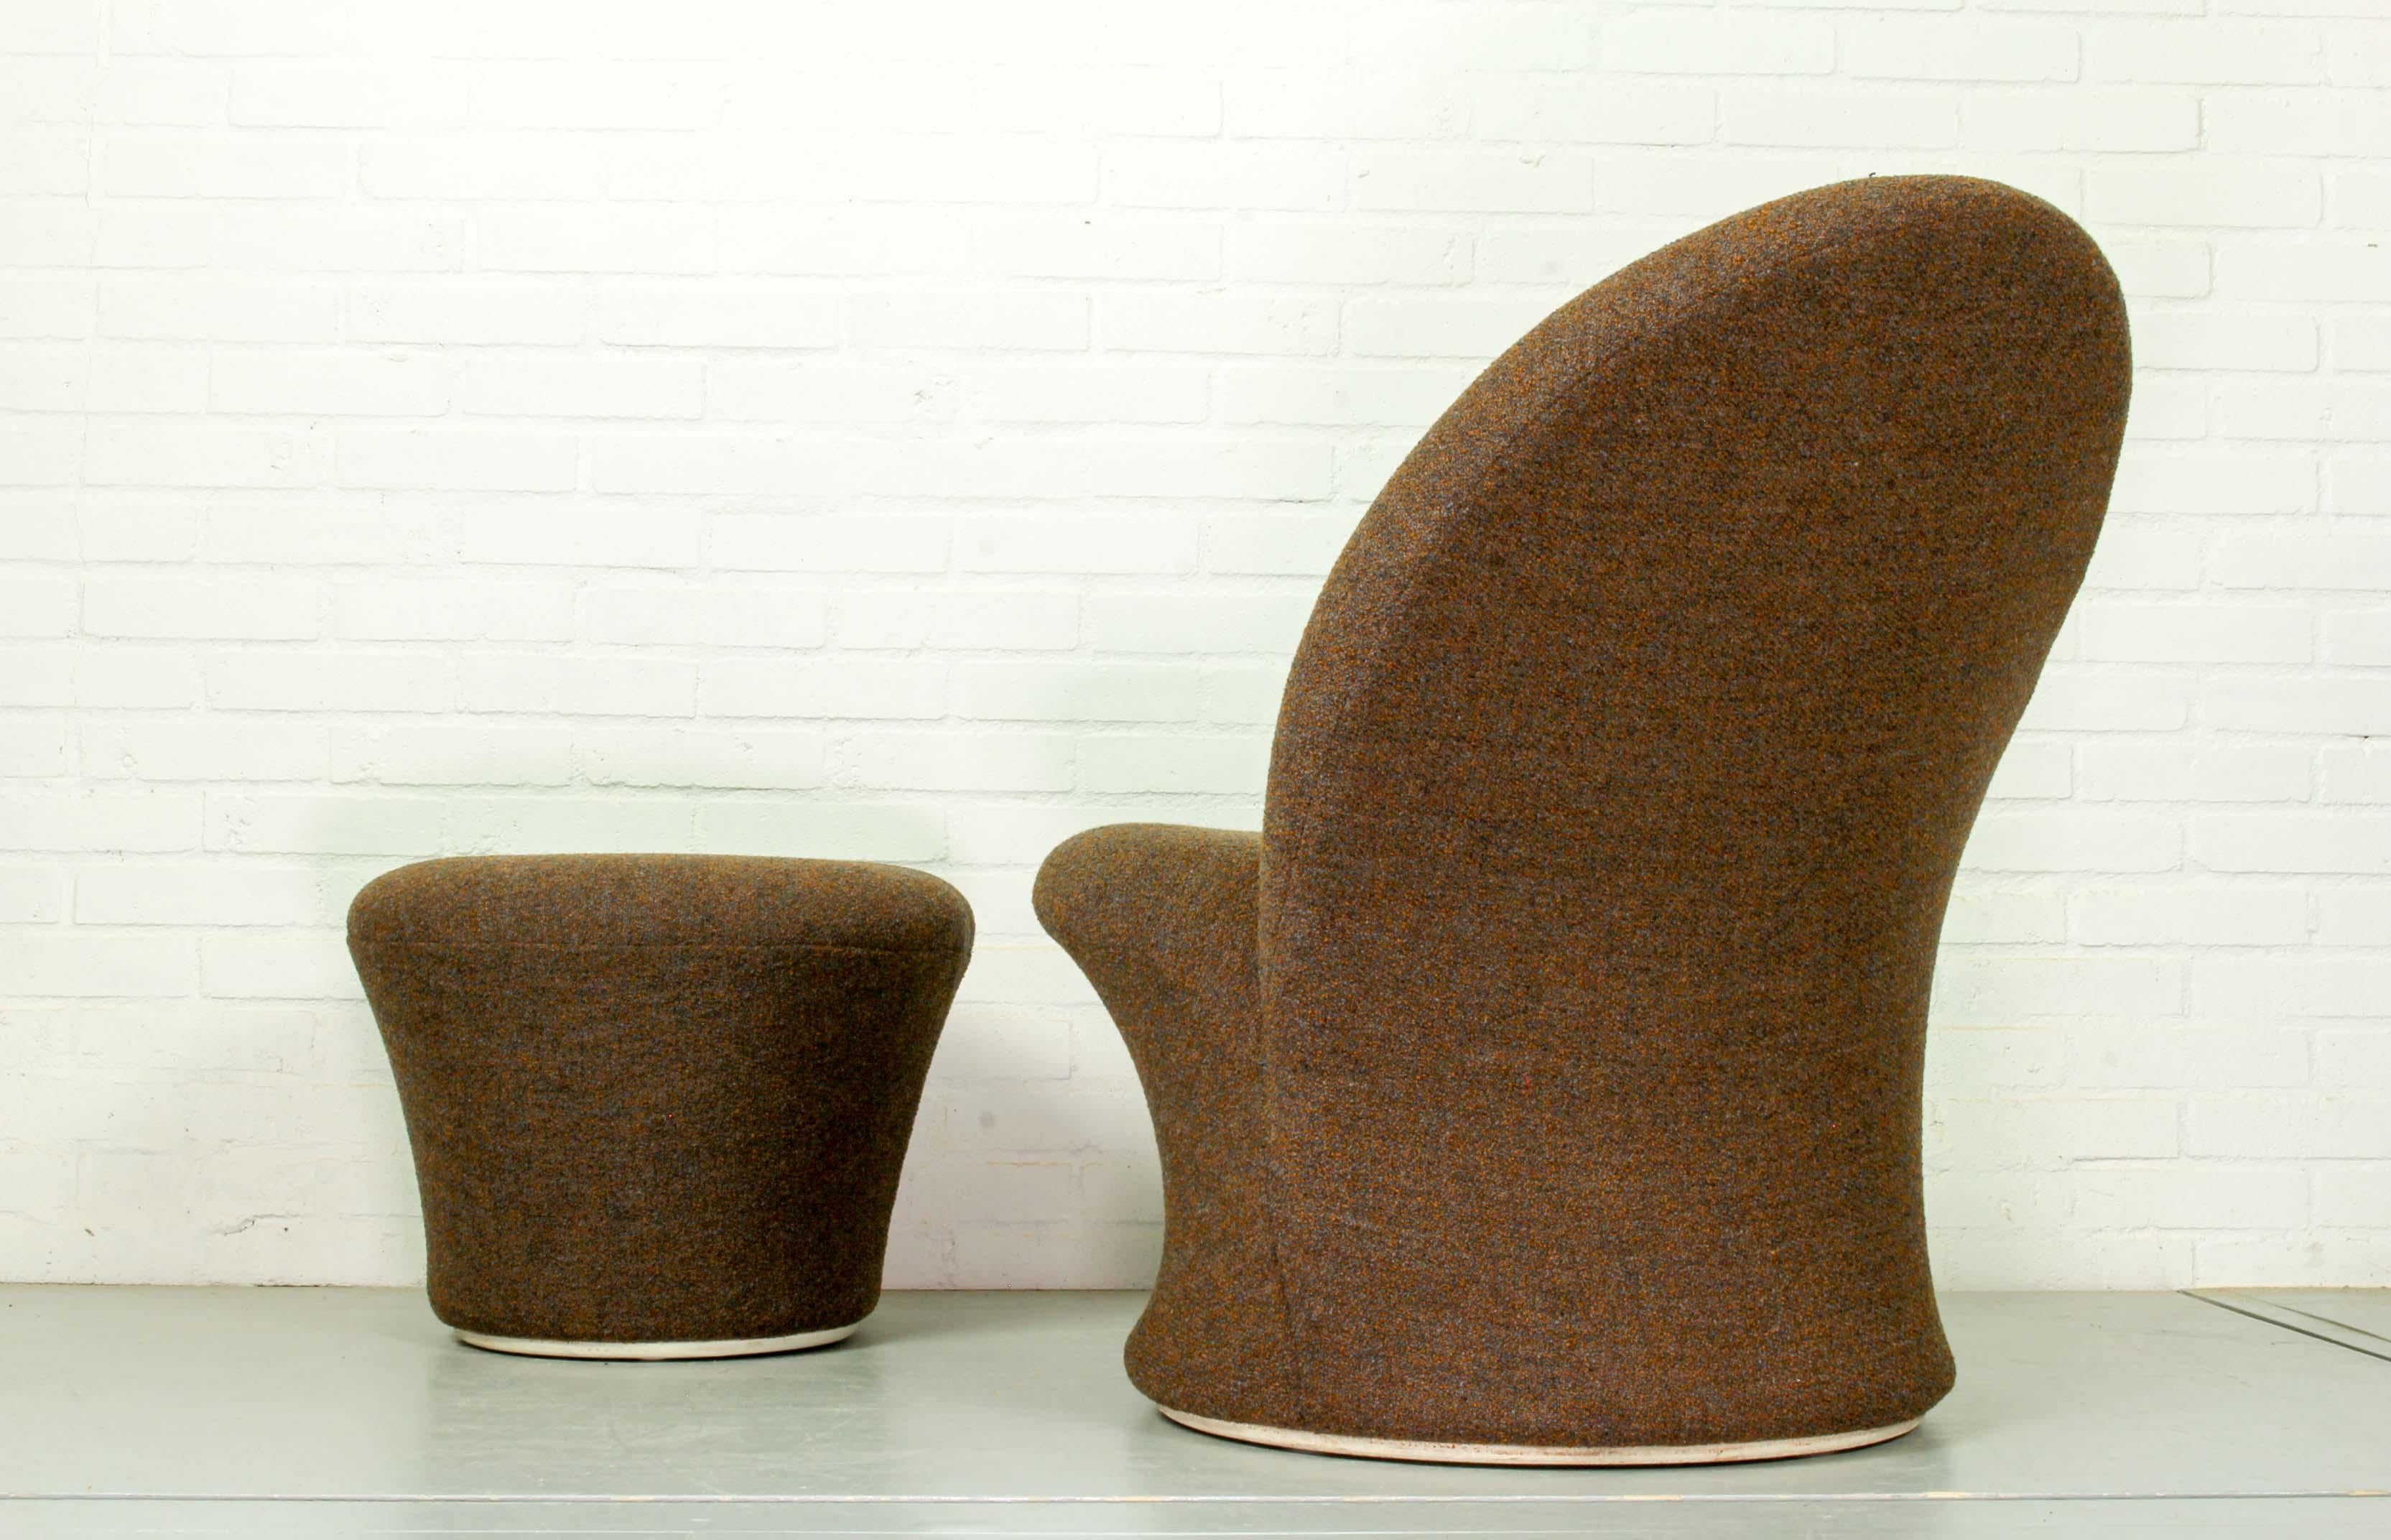 20th Century F572 Lounge Chair and mushroom ottoman by Pierre Paulin for Artifort, 1967